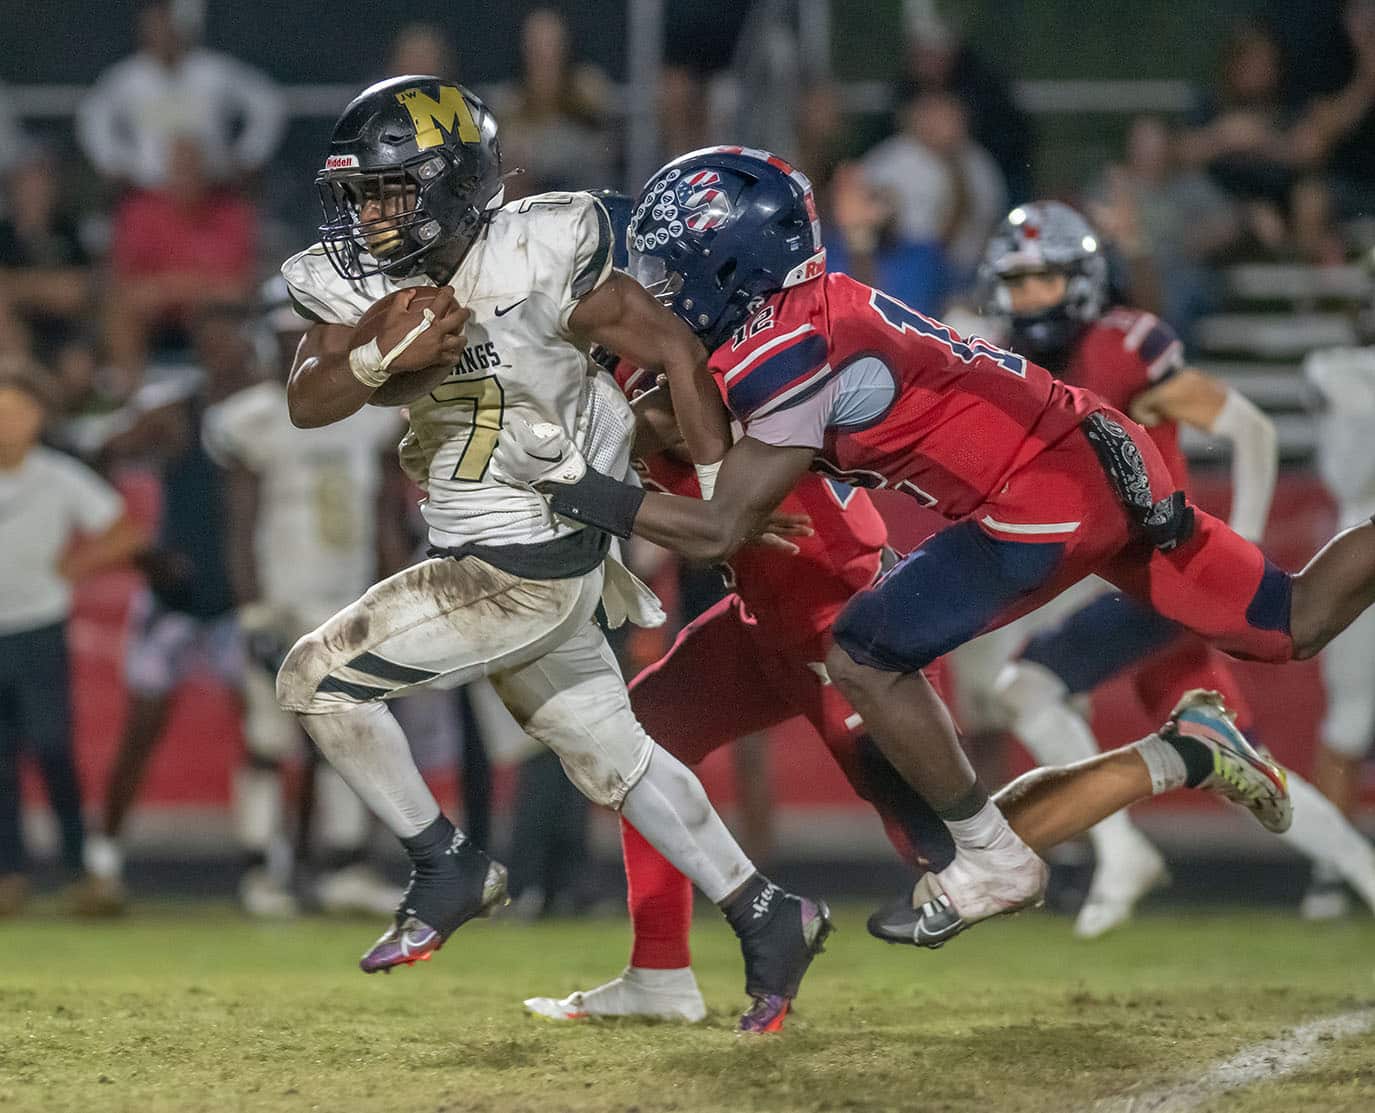 Springstead High, 12, Tyree Davis works to bring down Mitchell High, 7, Javarion Miller during the home playoff loss. Photo by JOE DiCRISTOFALO